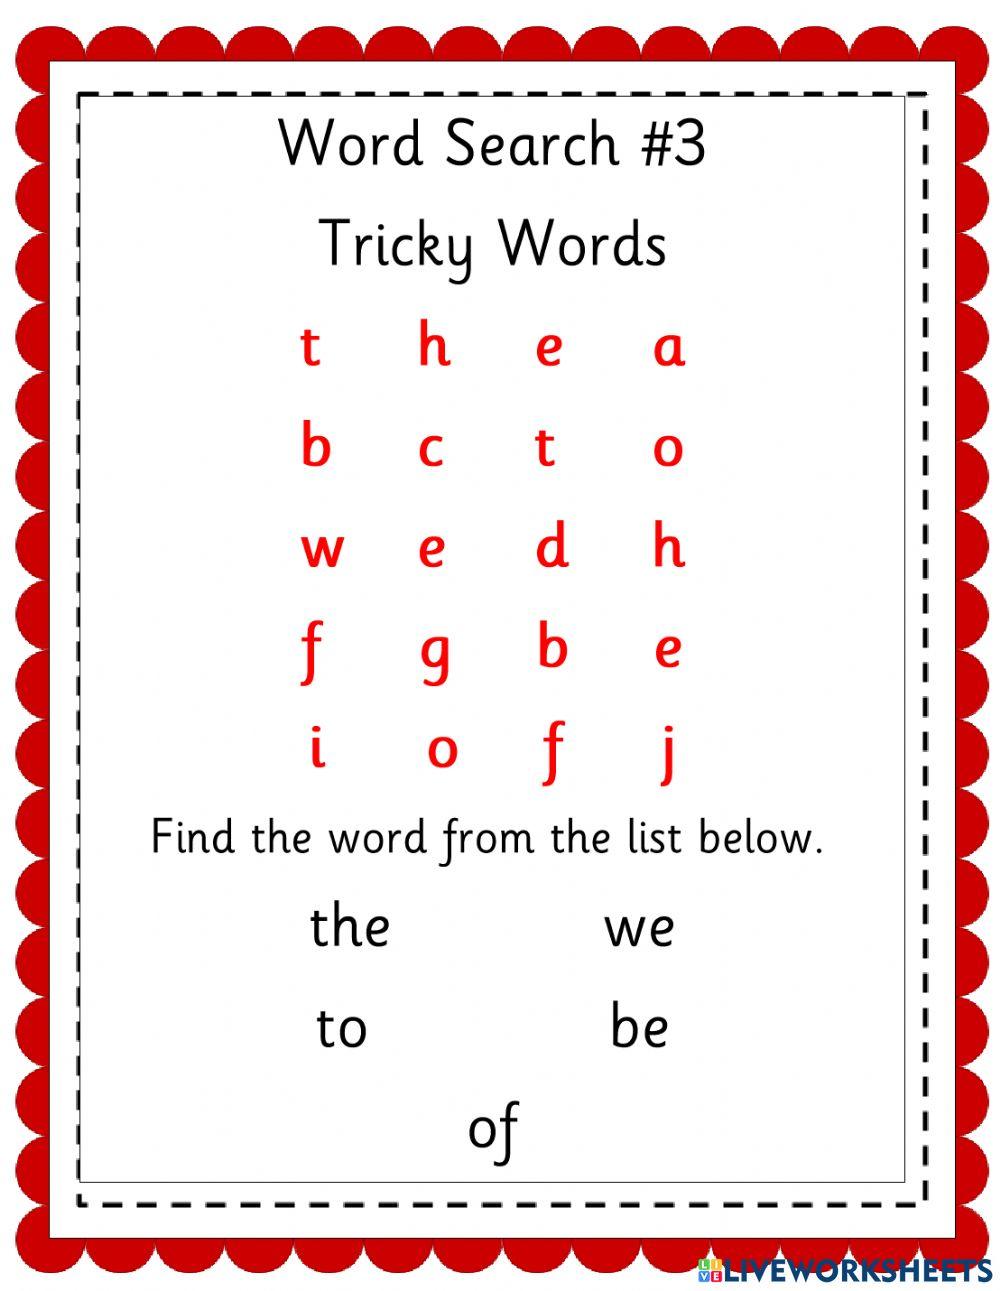 Tricky Words - Word Search -3